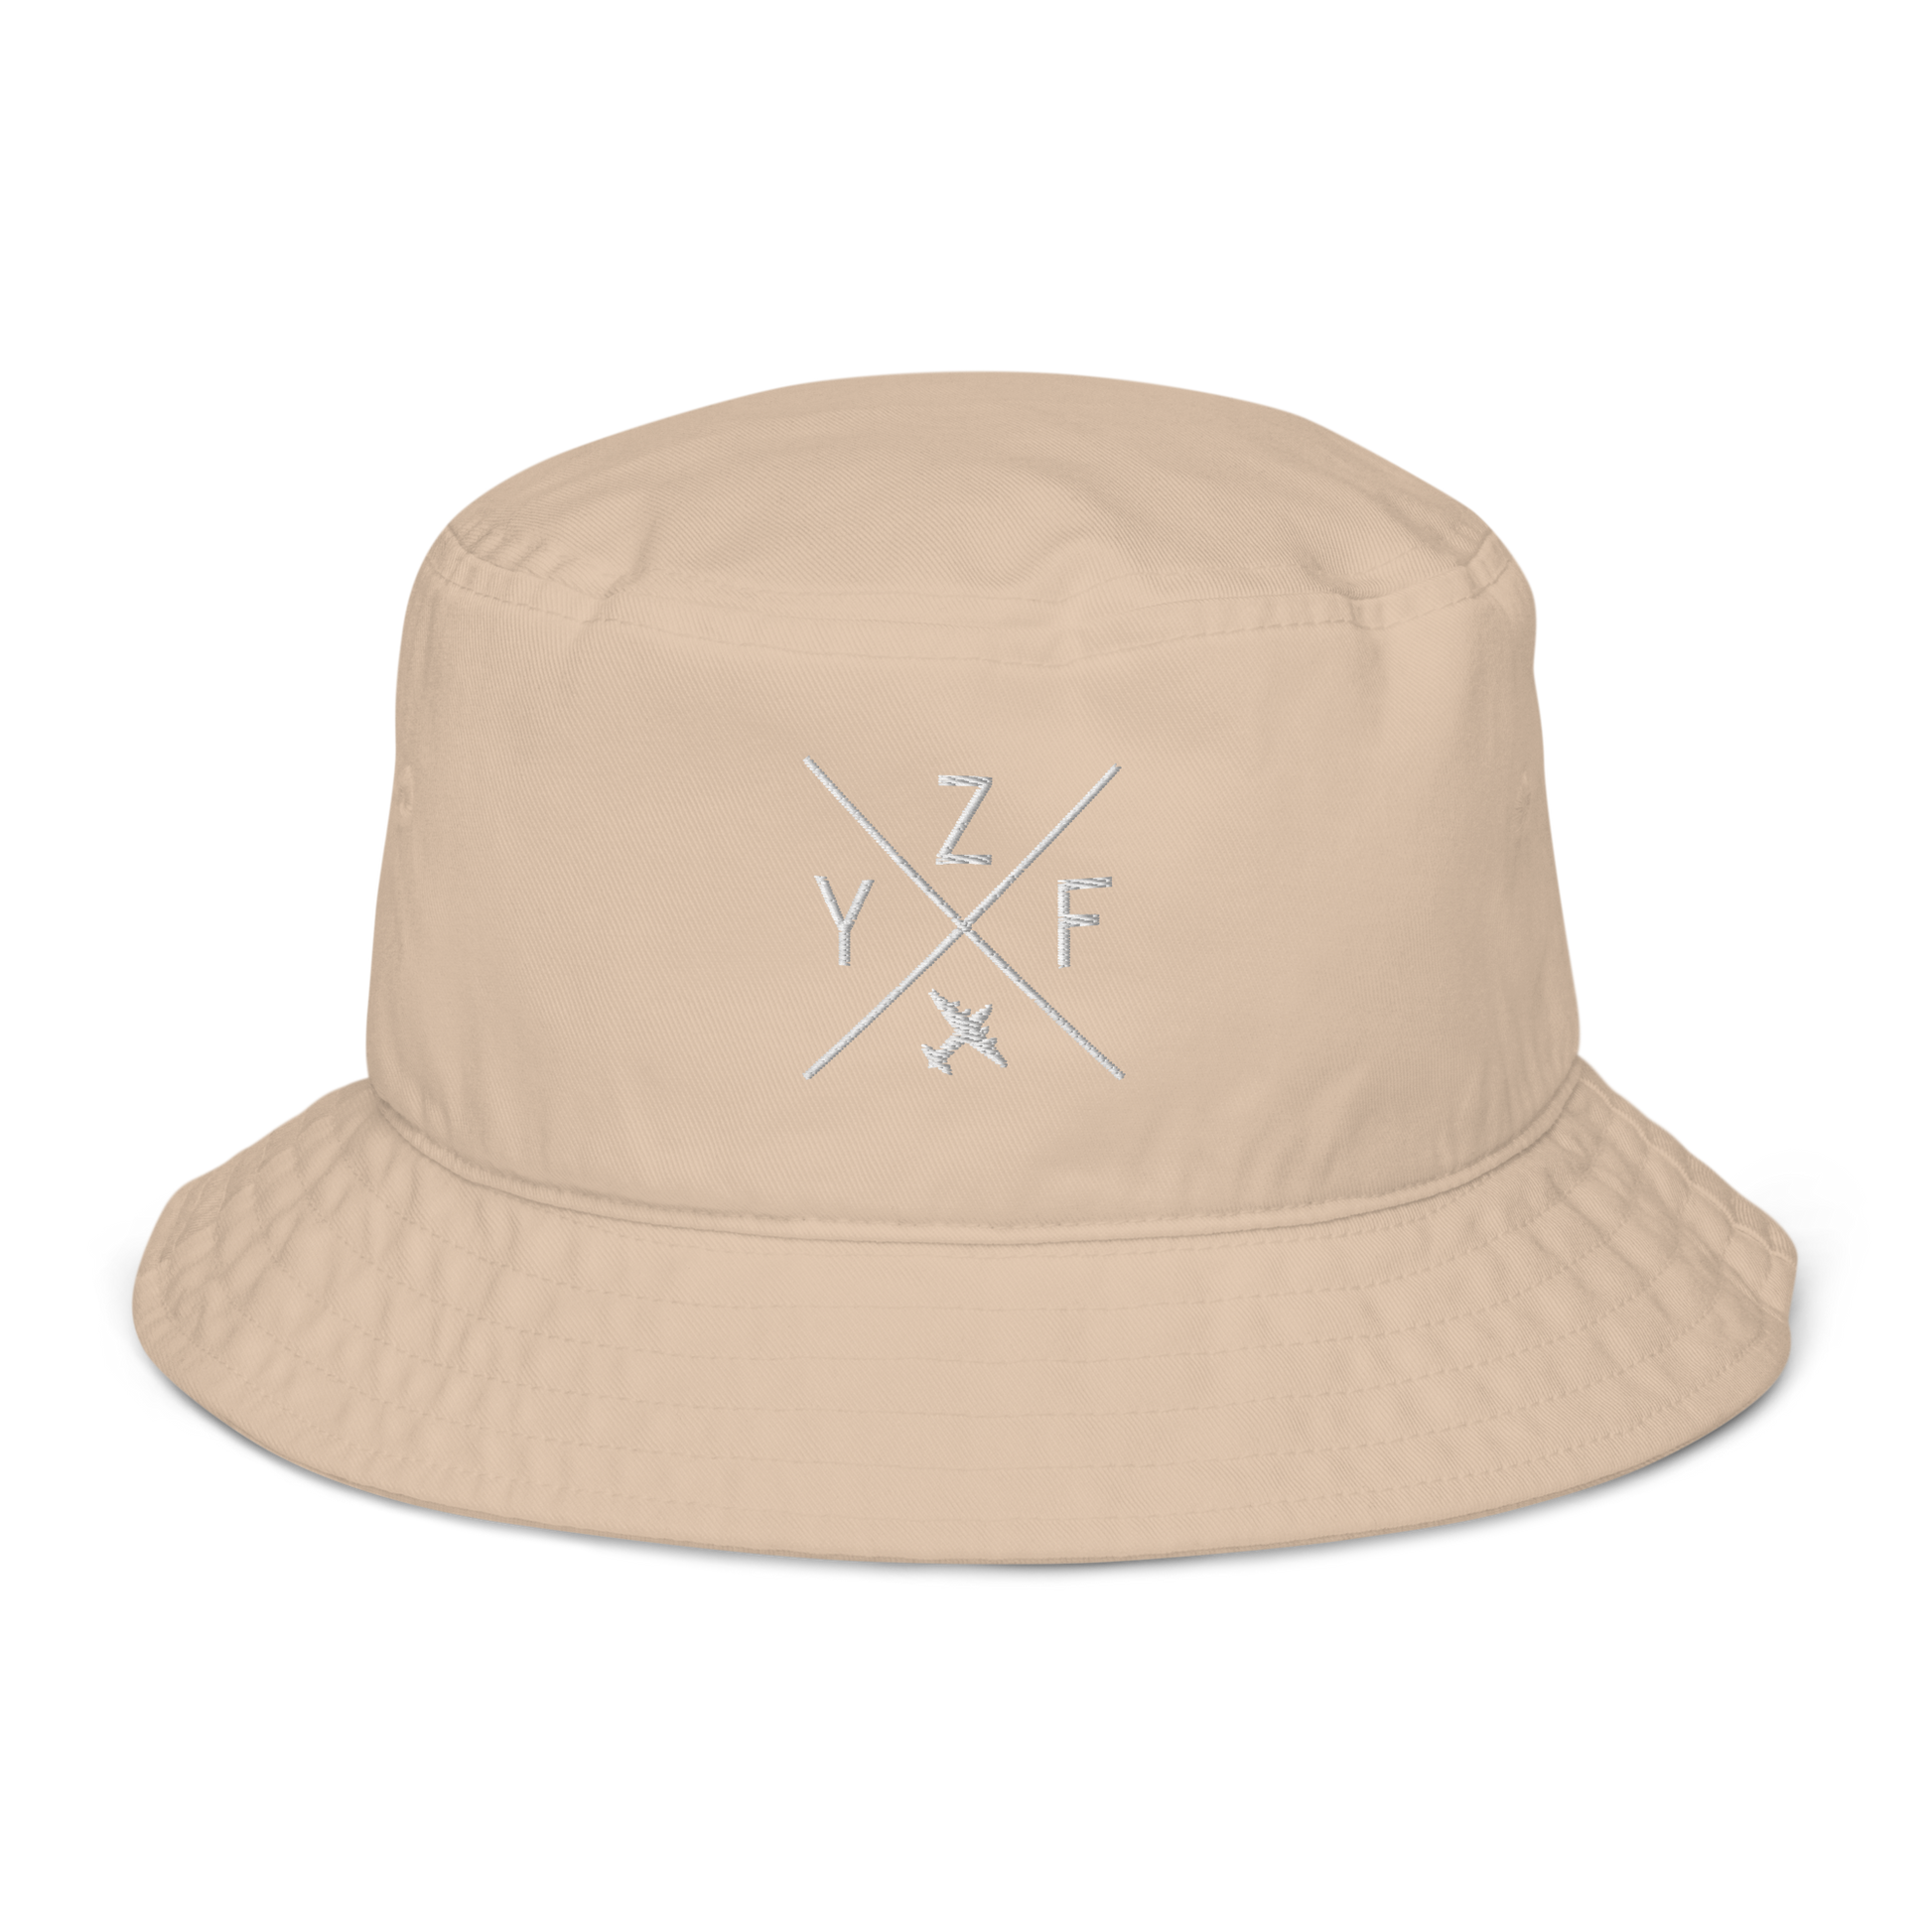 YHM Designs - YZF Yellowknife Organic Cotton Bucket Hat - Crossed-X Design with Airport Code and Vintage Propliner - White Embroidery - Image 08